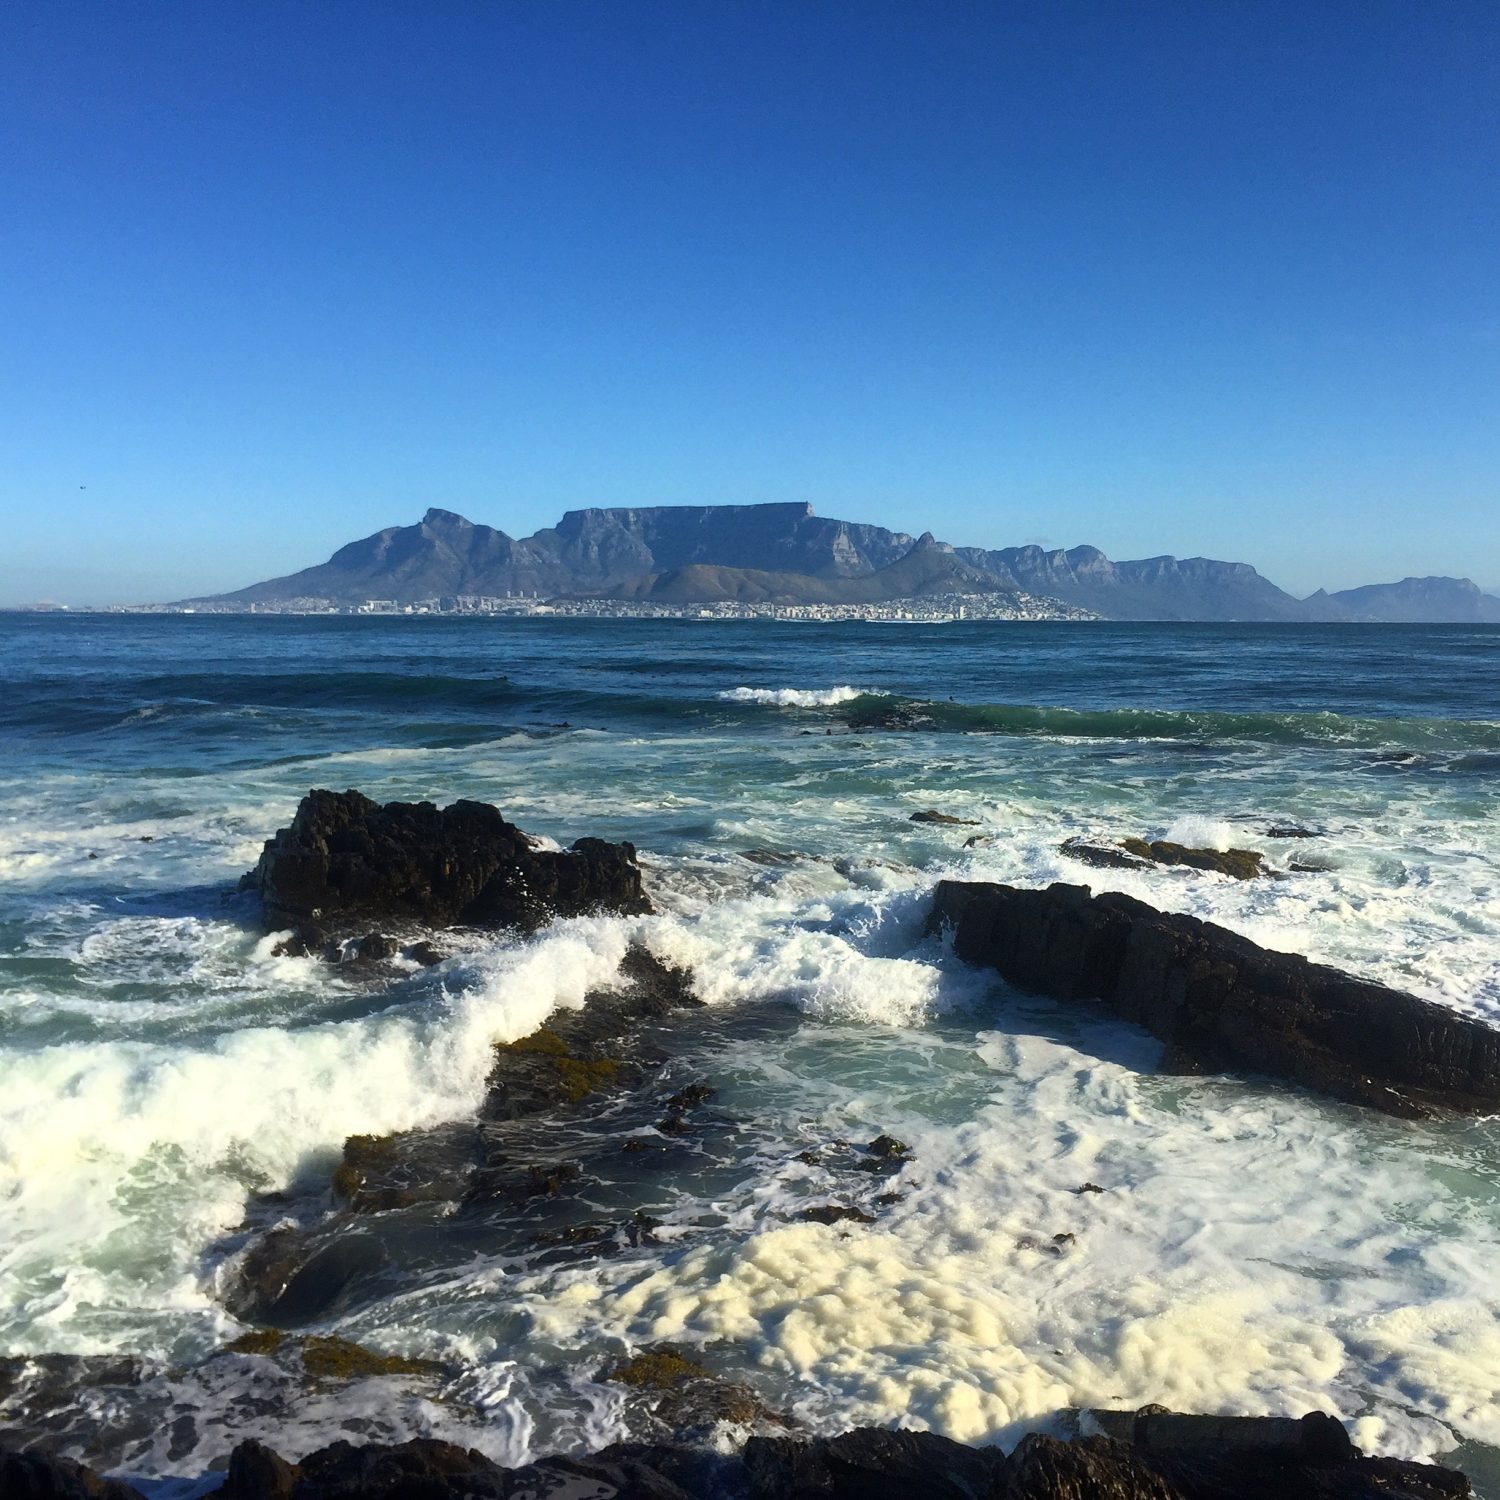 View of Table Mountain from the shore with waves and foam washing up